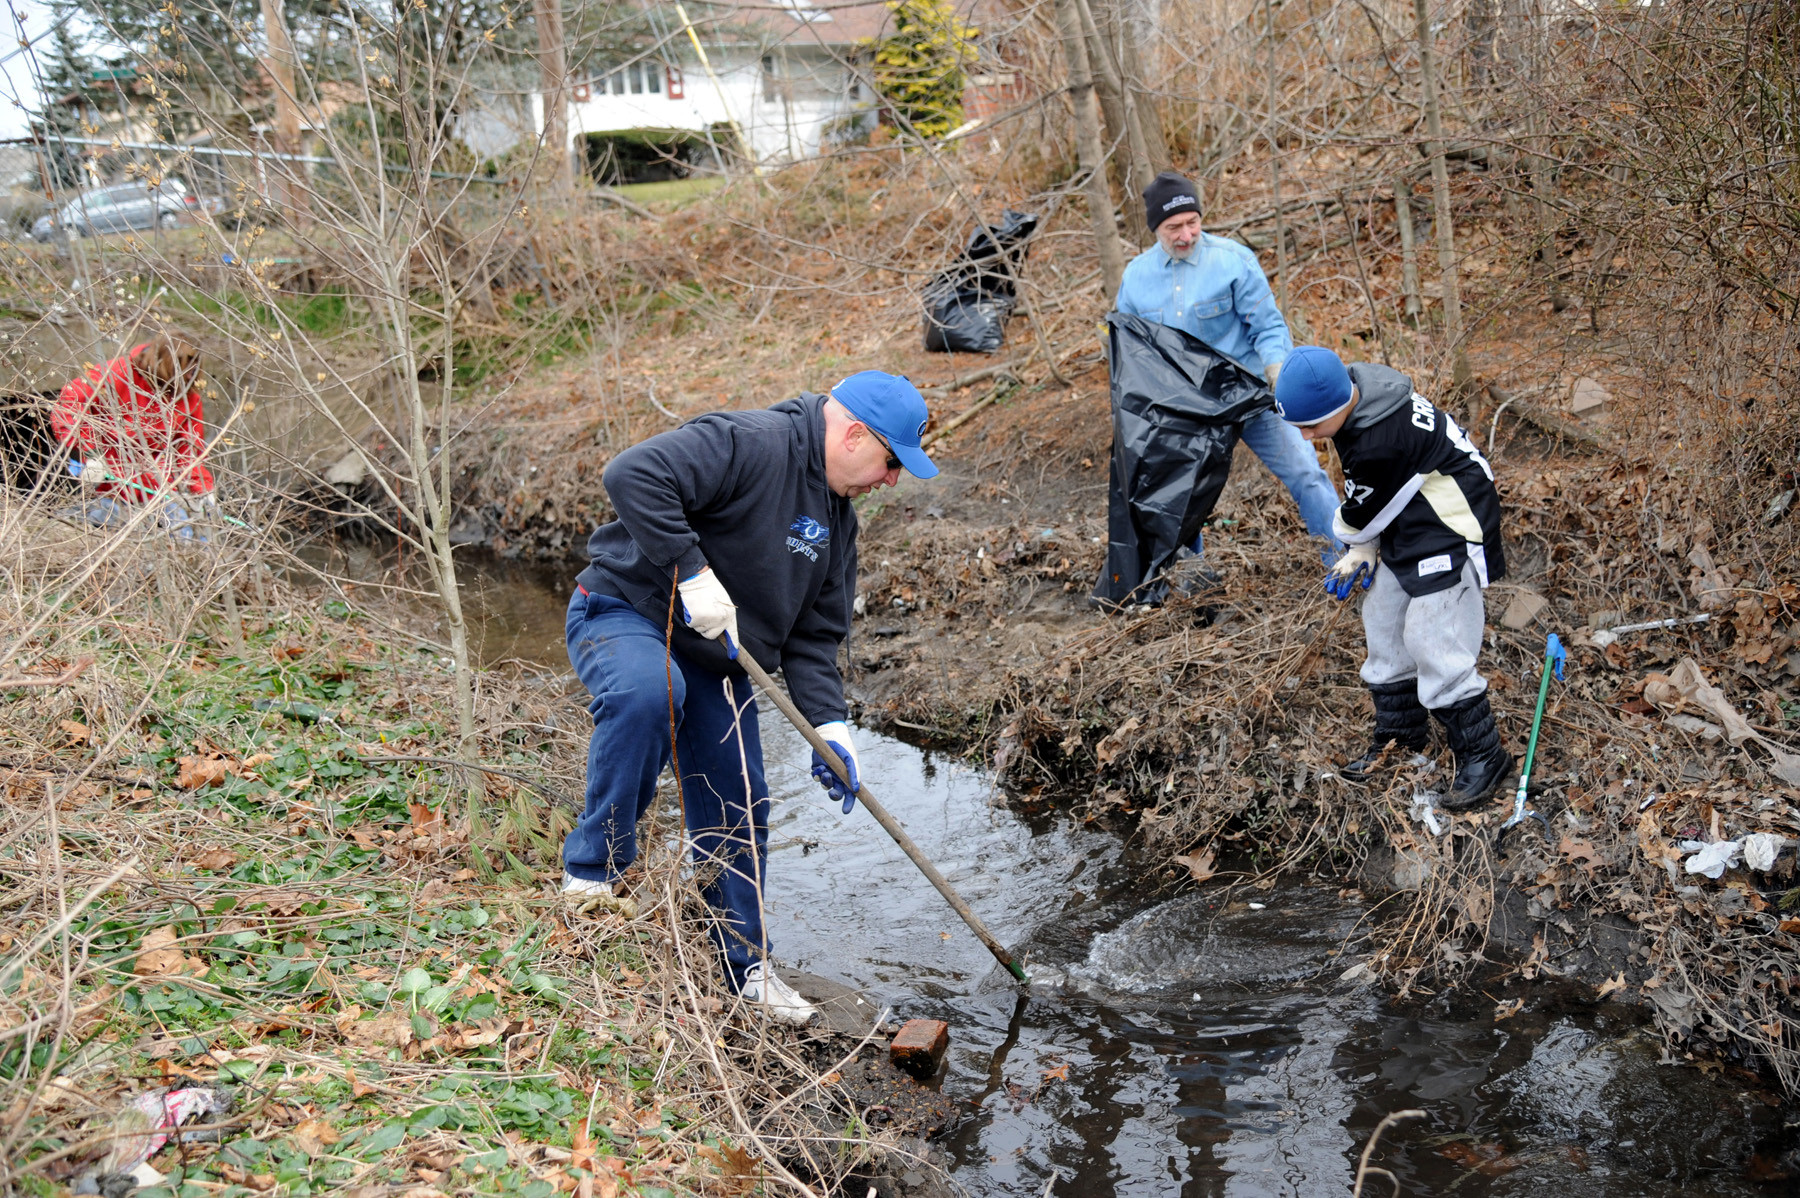 Victor Milone, Bob Cesario and Brian Milone, 13, helped clean up.